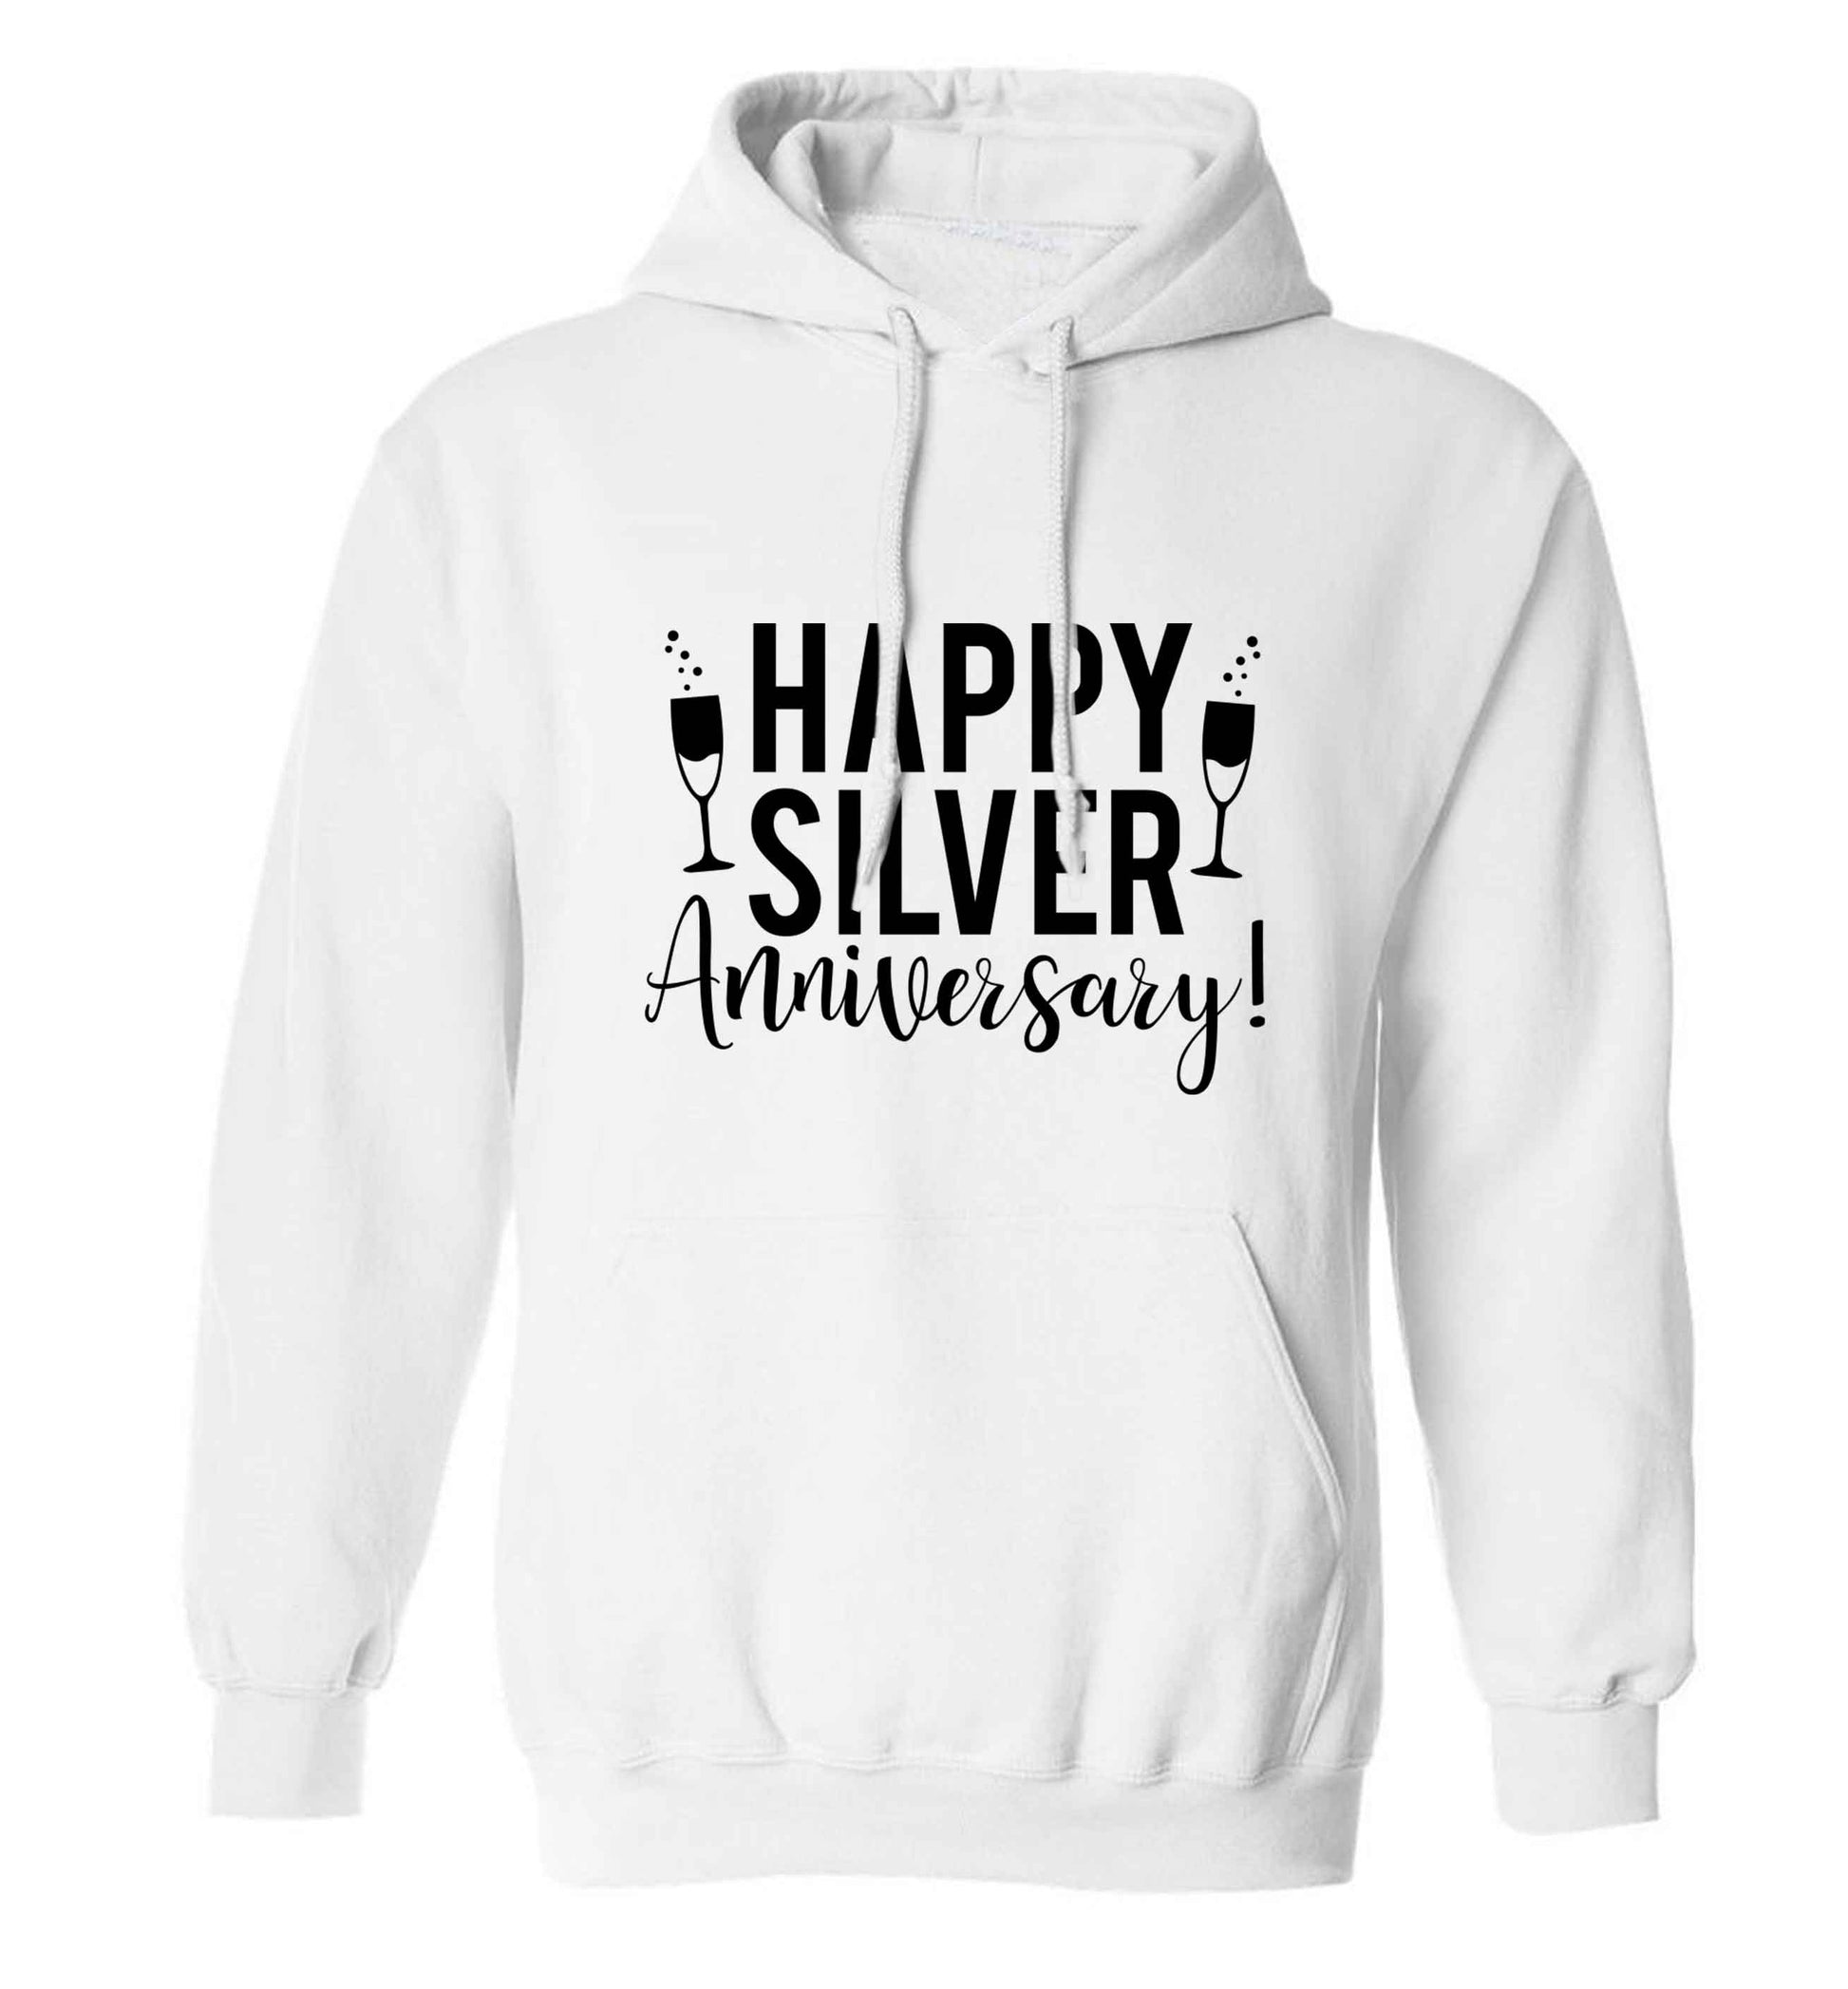 Happy silver anniversary! adults unisex white hoodie 2XL